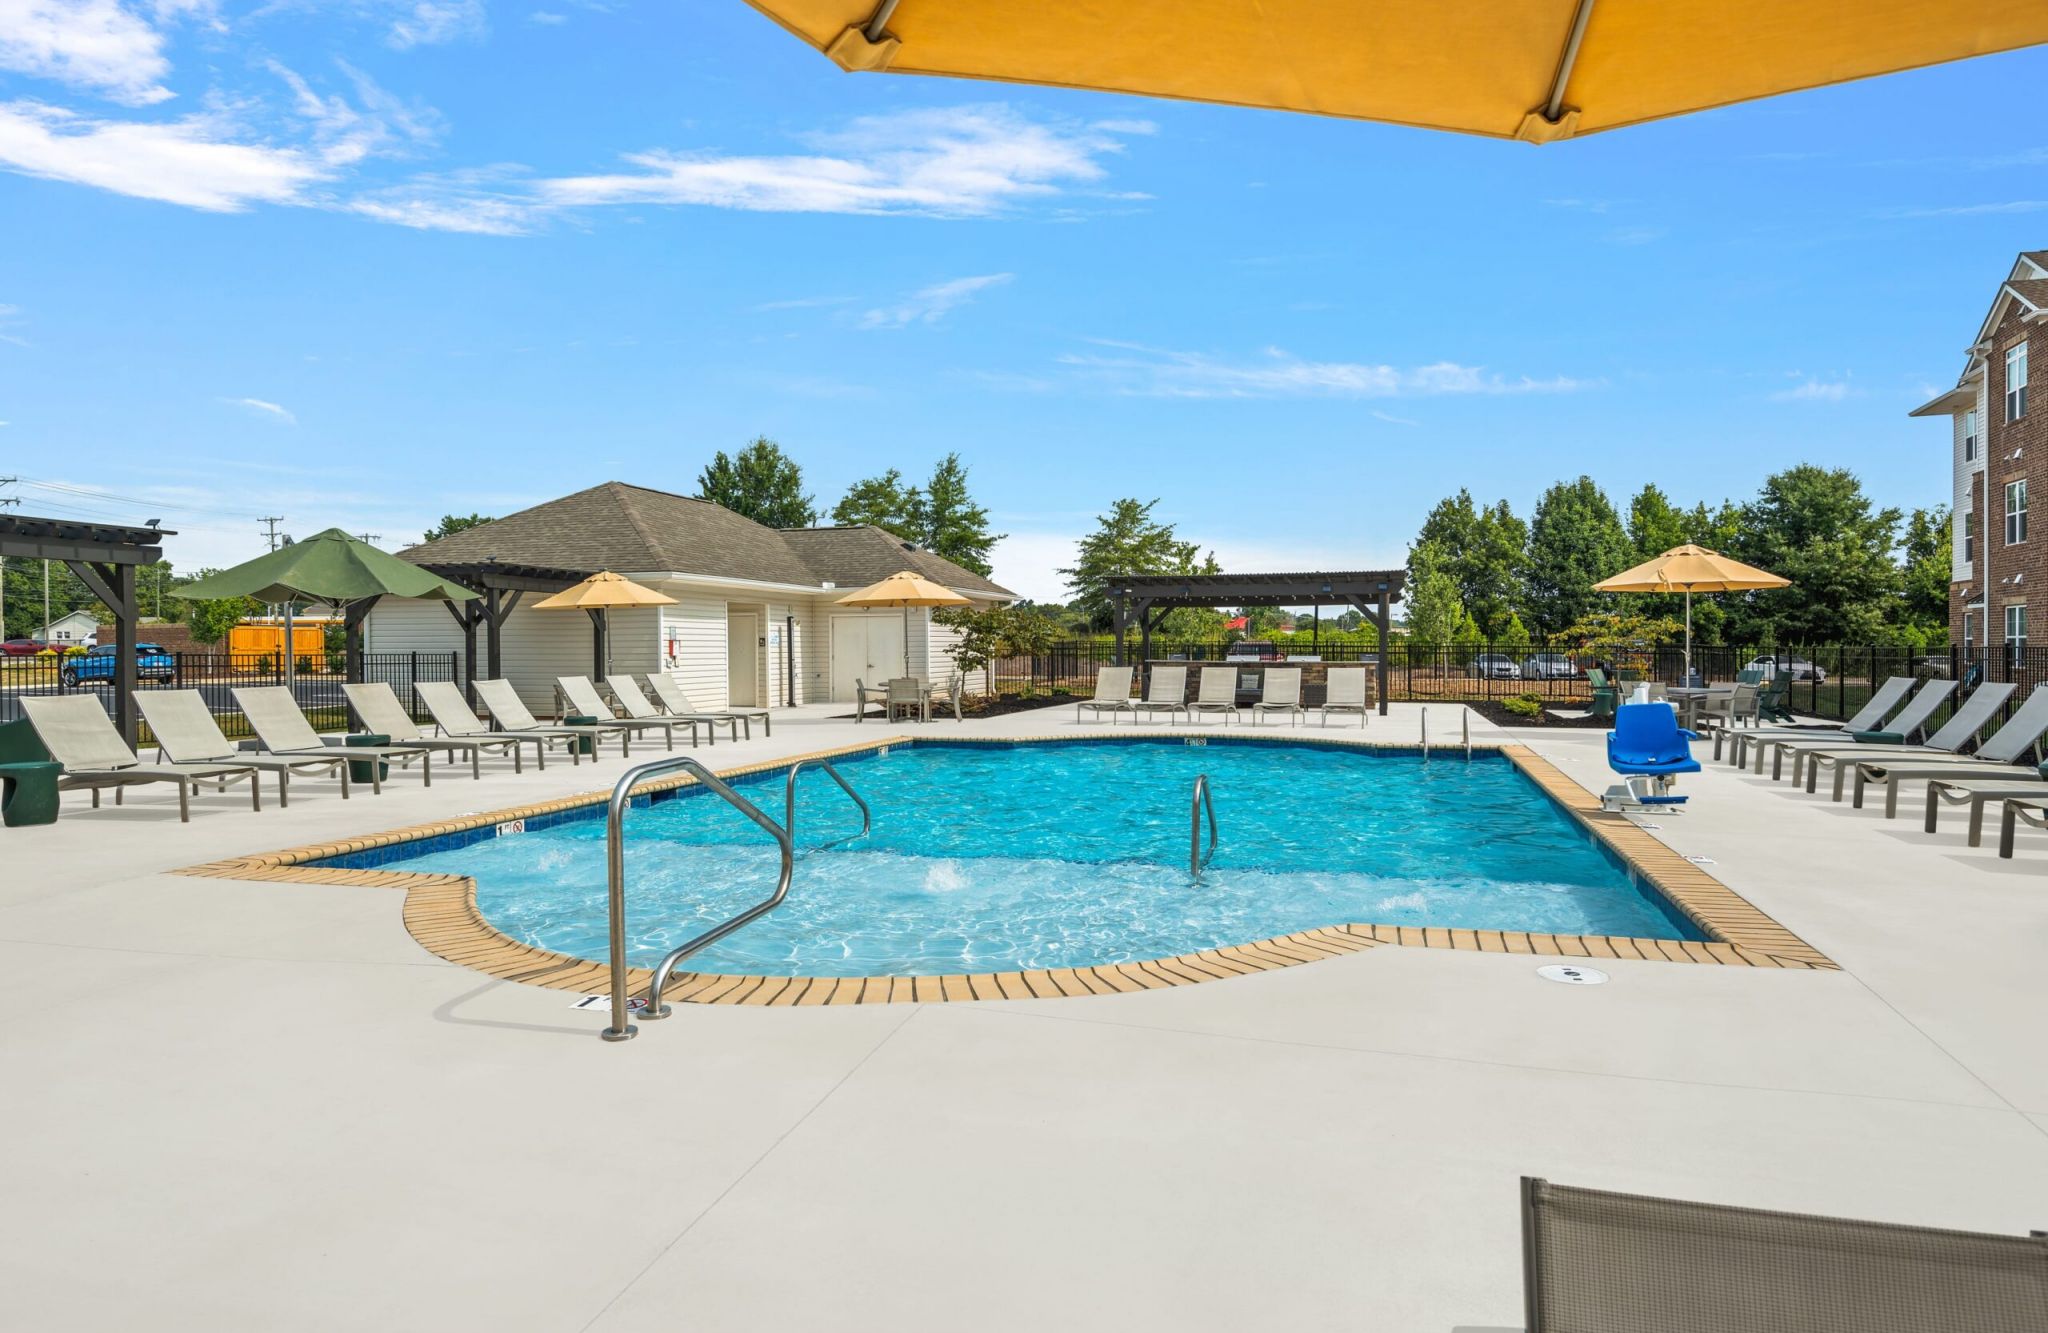 Hawthorne at St. Marks swimming pool with lounge chairs in the shallow water area and surrounding lounge seating and a cabana